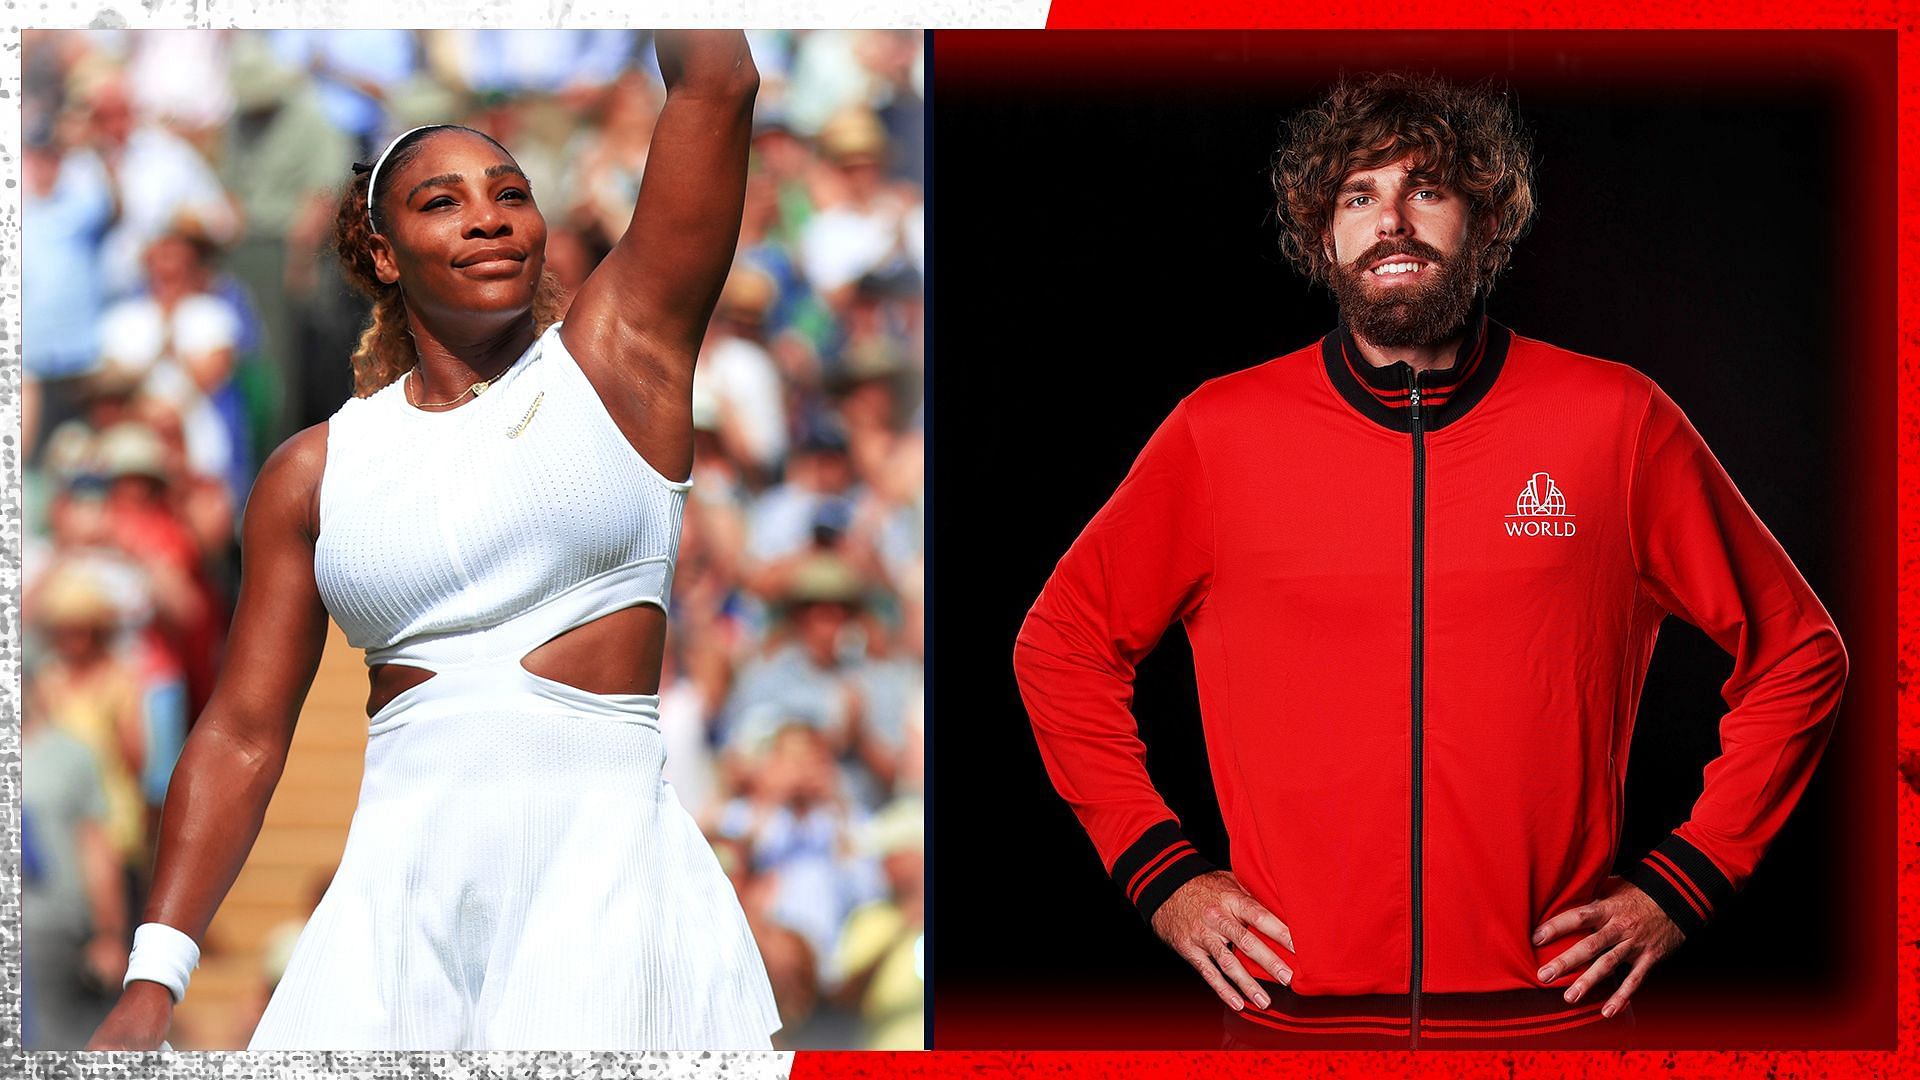 Reilly Opelka congratulated Serena Williams on winning the Portrait of the Nation award 